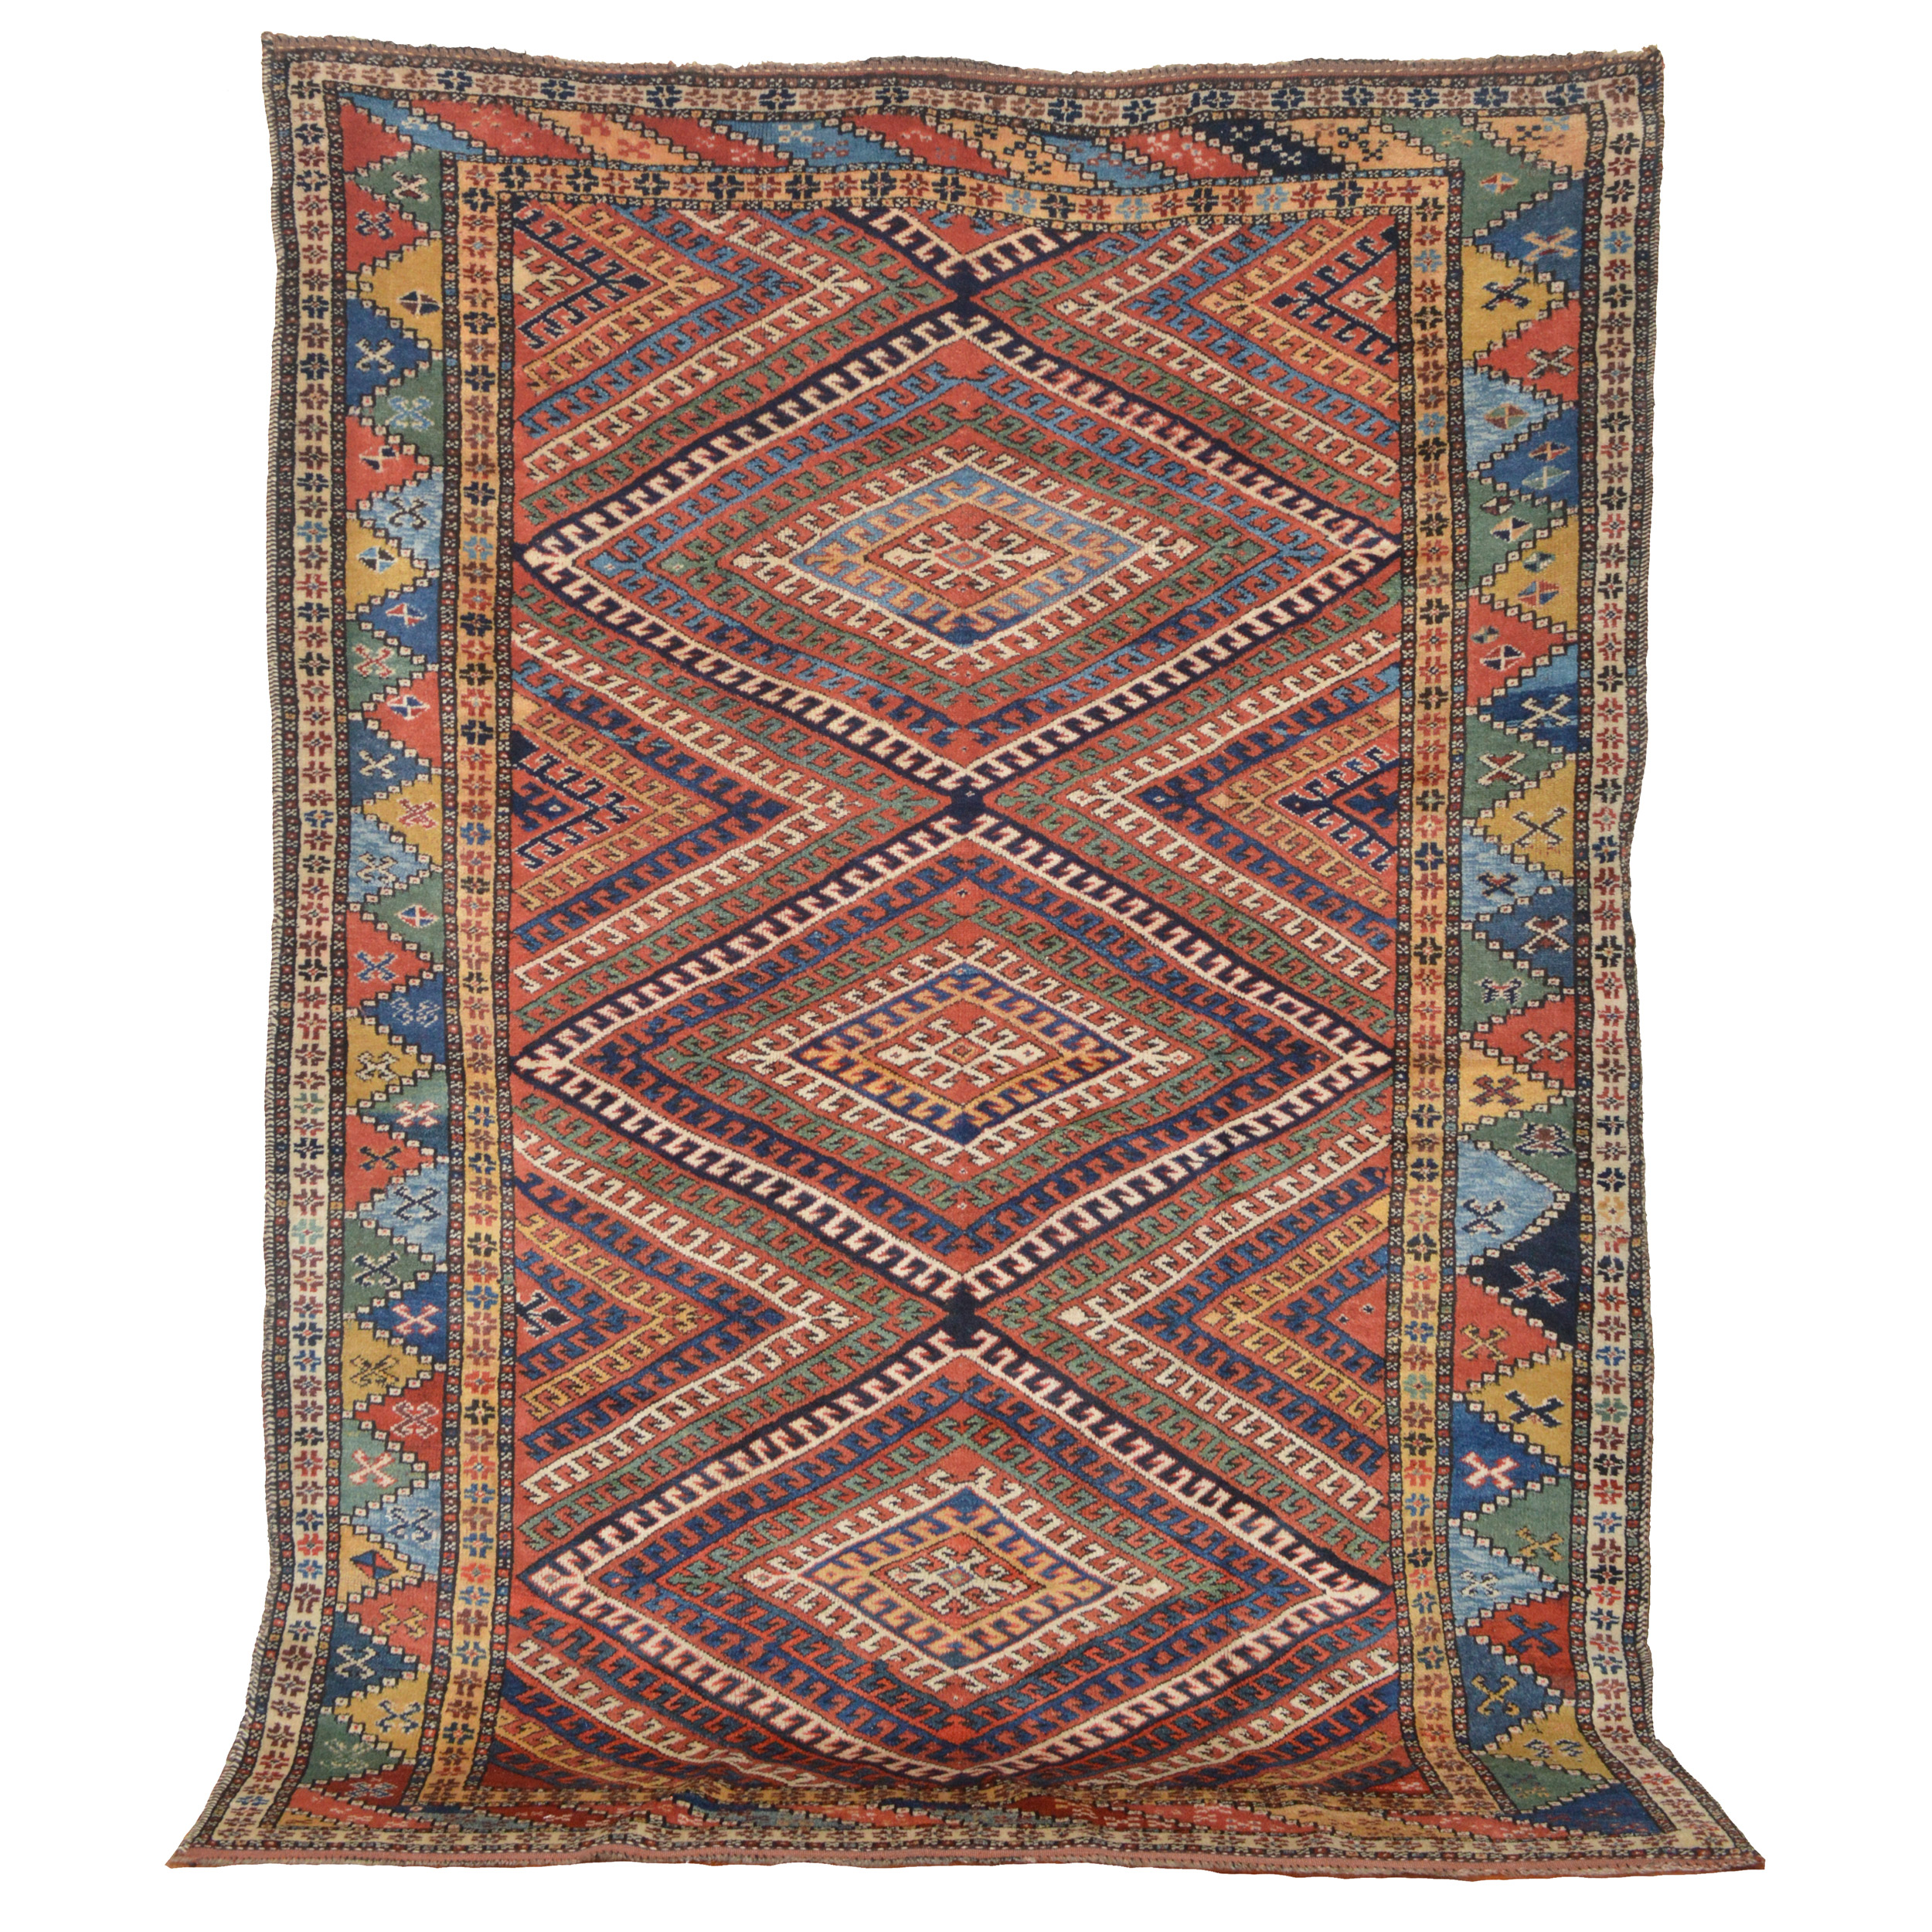 Antique south Persian Luri tribal "eye dazzler" rug, circa 1880. Douglas Stock Gallery offers a selection of antique Persian tribal rugs including rugs by the QashQa'i, Luri, Afshar and Bakhtiari tribes. Antique rugs Boston,MA area New England, antique rugs New York, antique rugs Washington DC